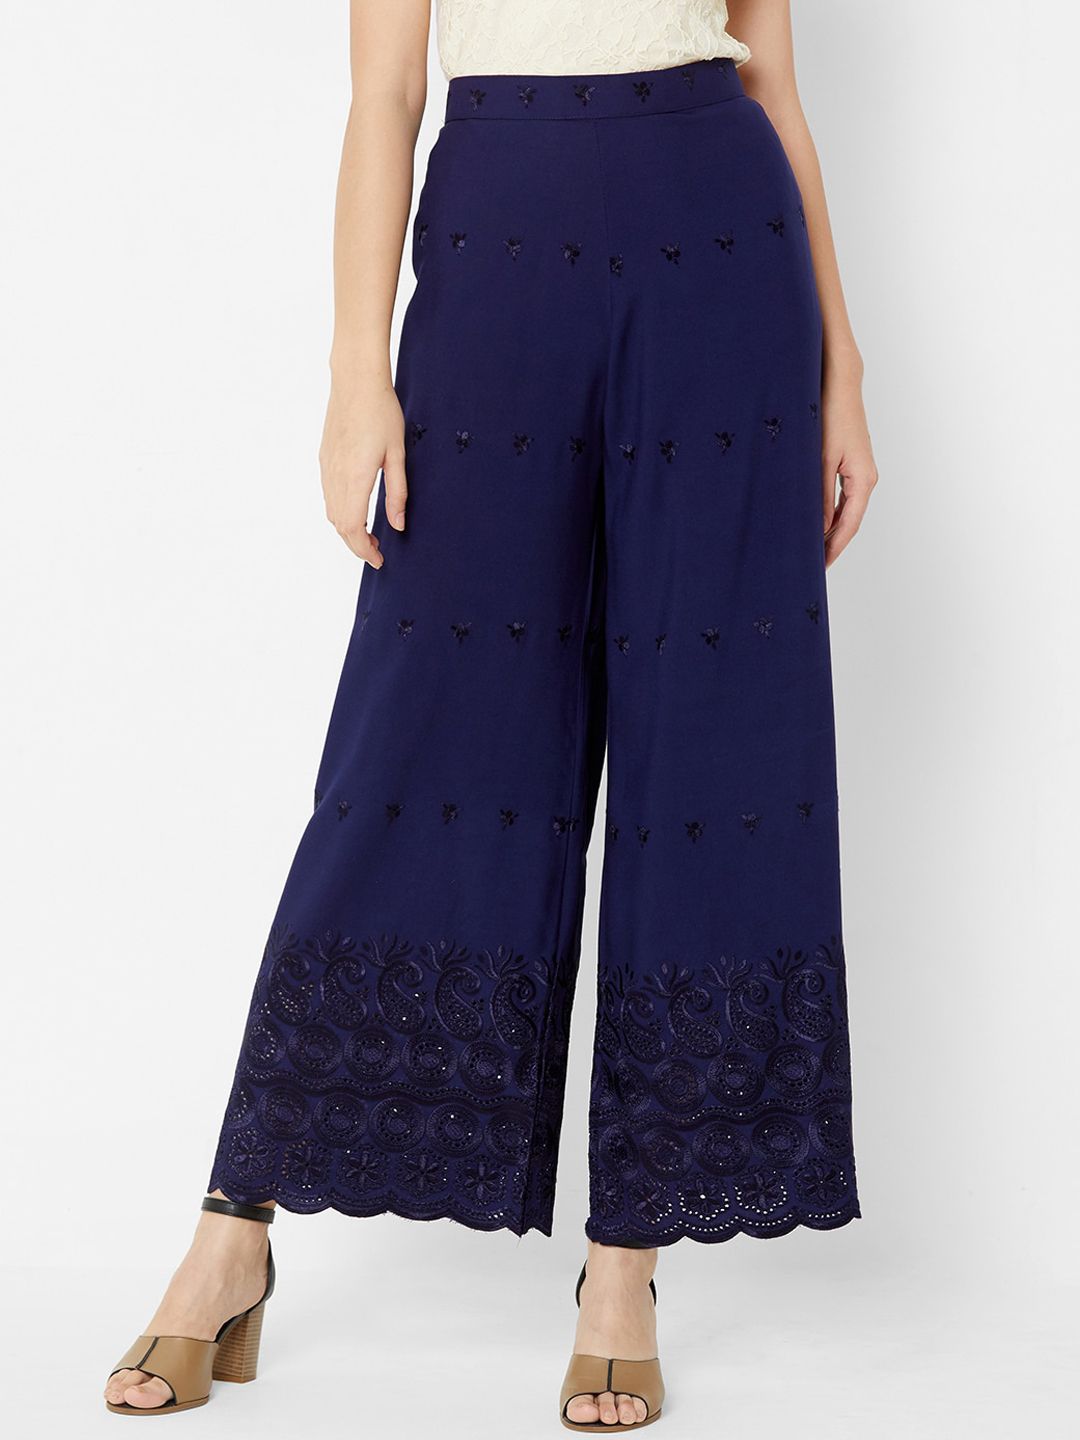 ZOLA Women Navy Blue Floral Printed Parallel Trousers Price in India